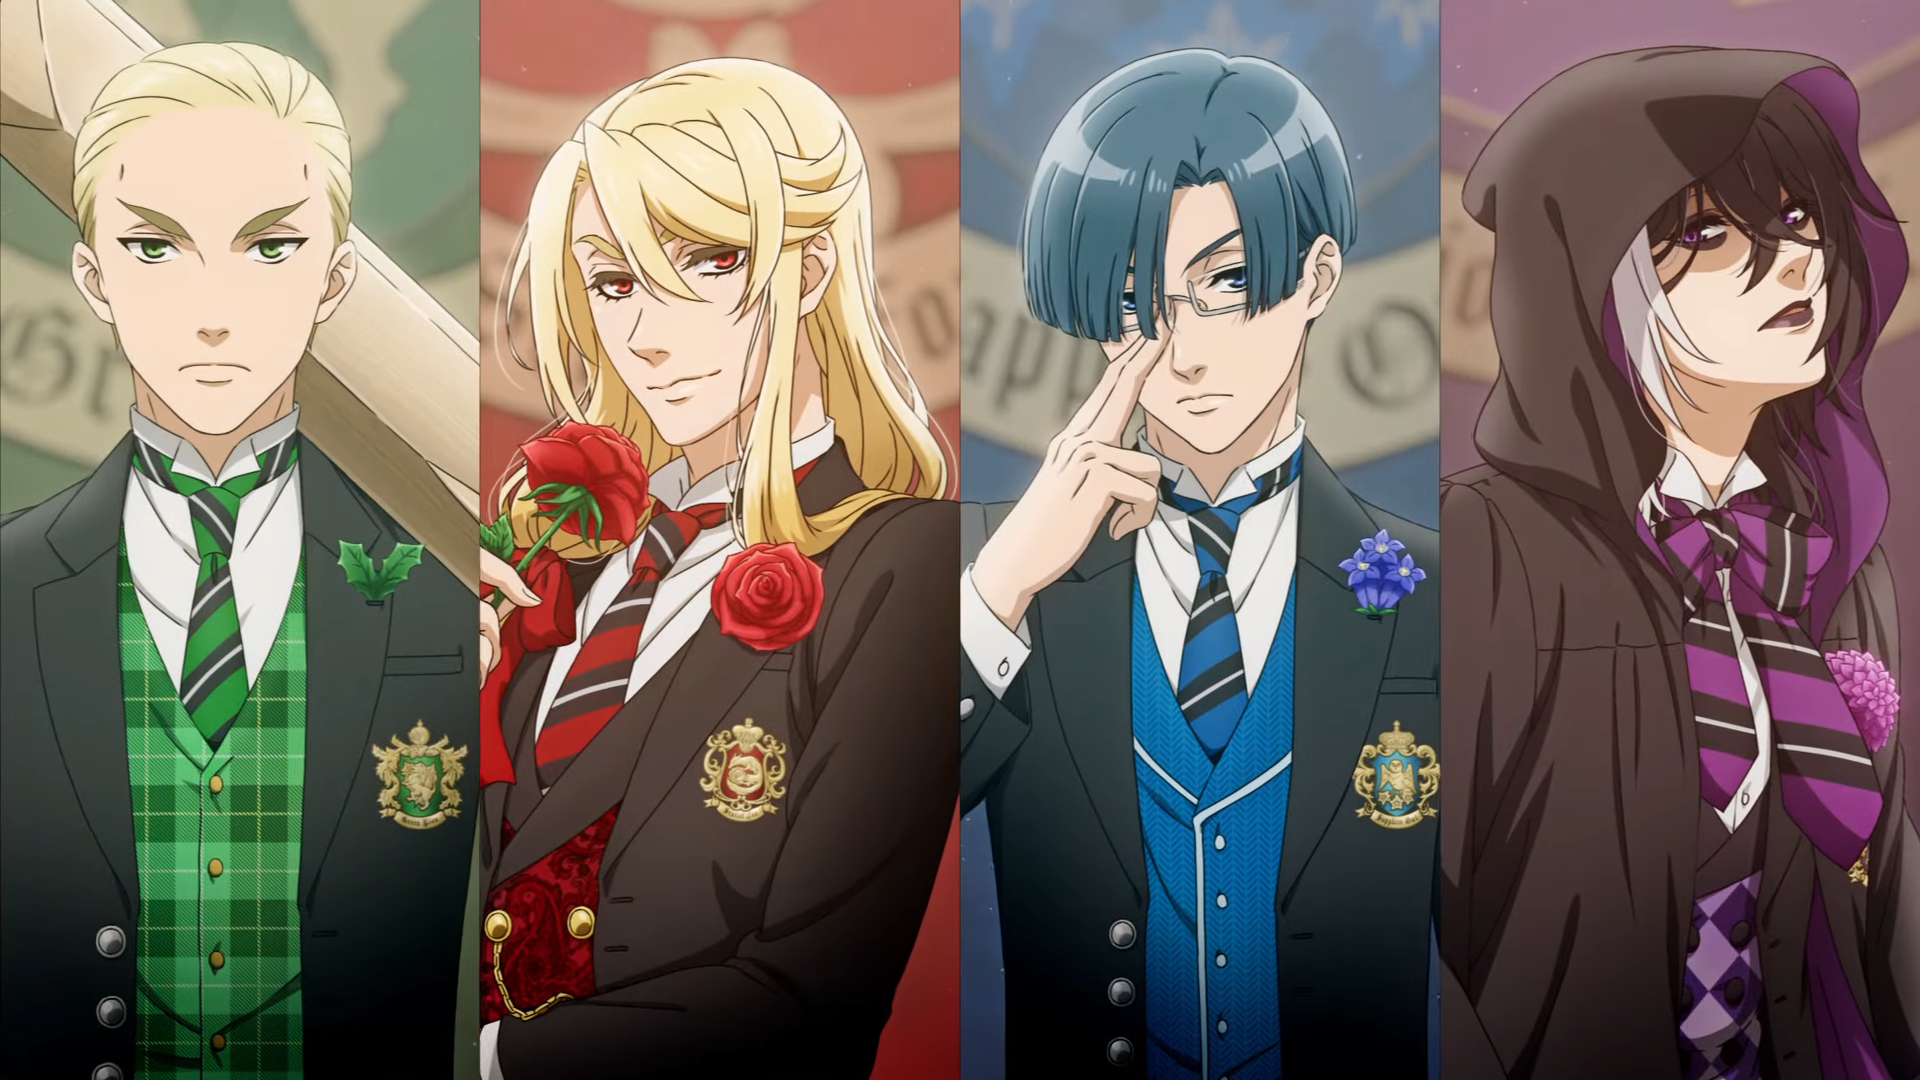 Black Butler Anime watch order: All Filler and Canon Episodes